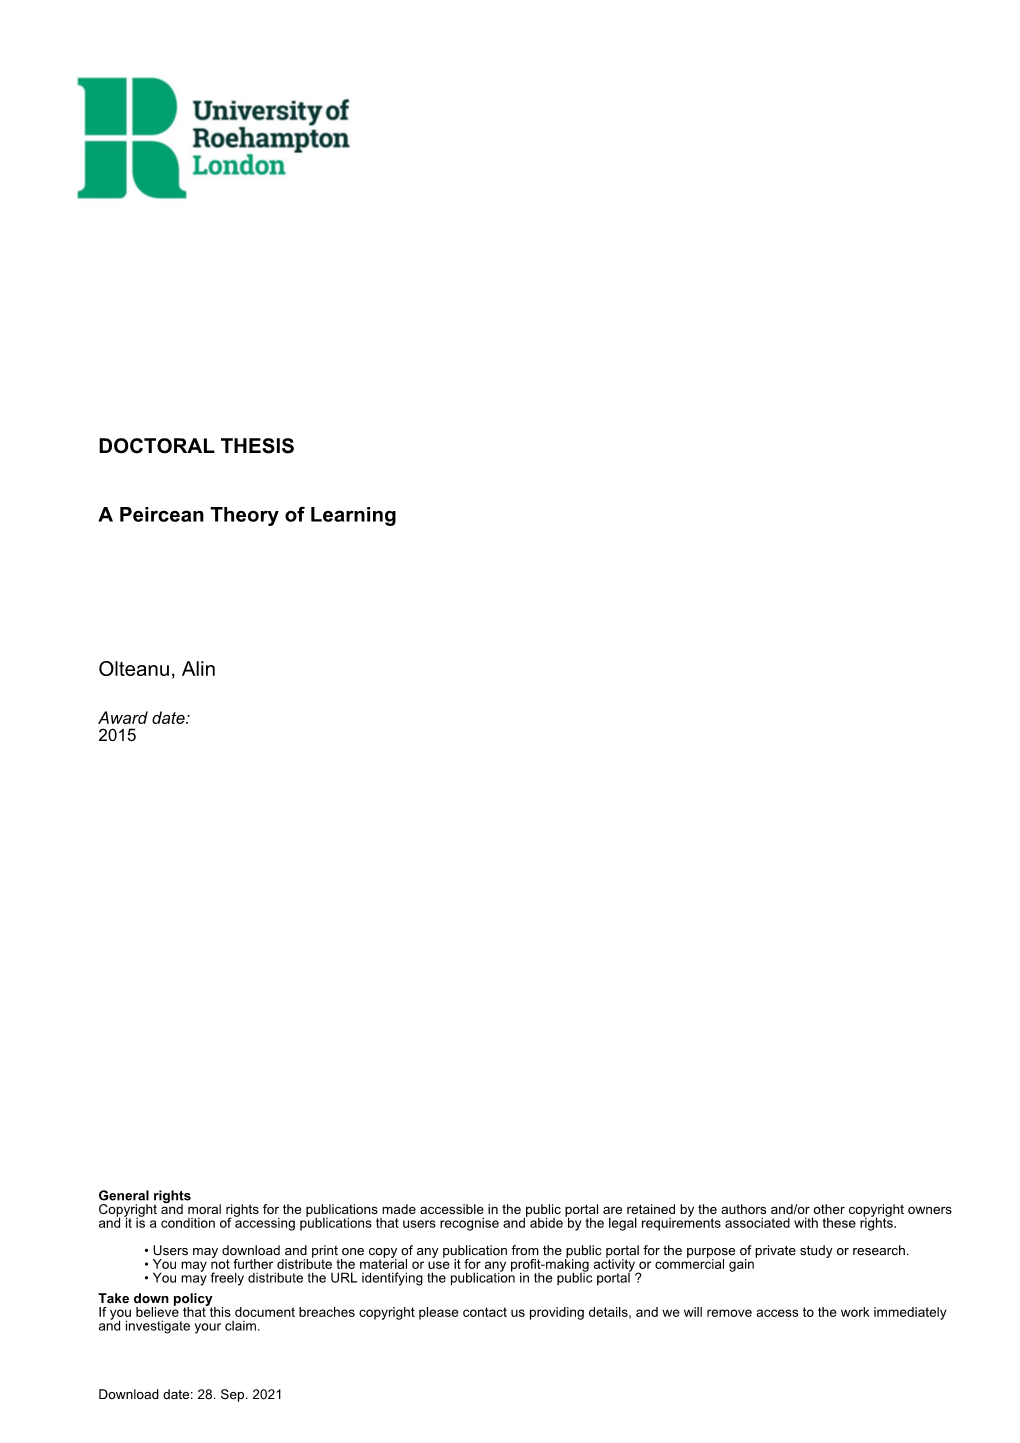 DOCTORAL THESIS a Peircean Theory of Learning Olteanu, Alin